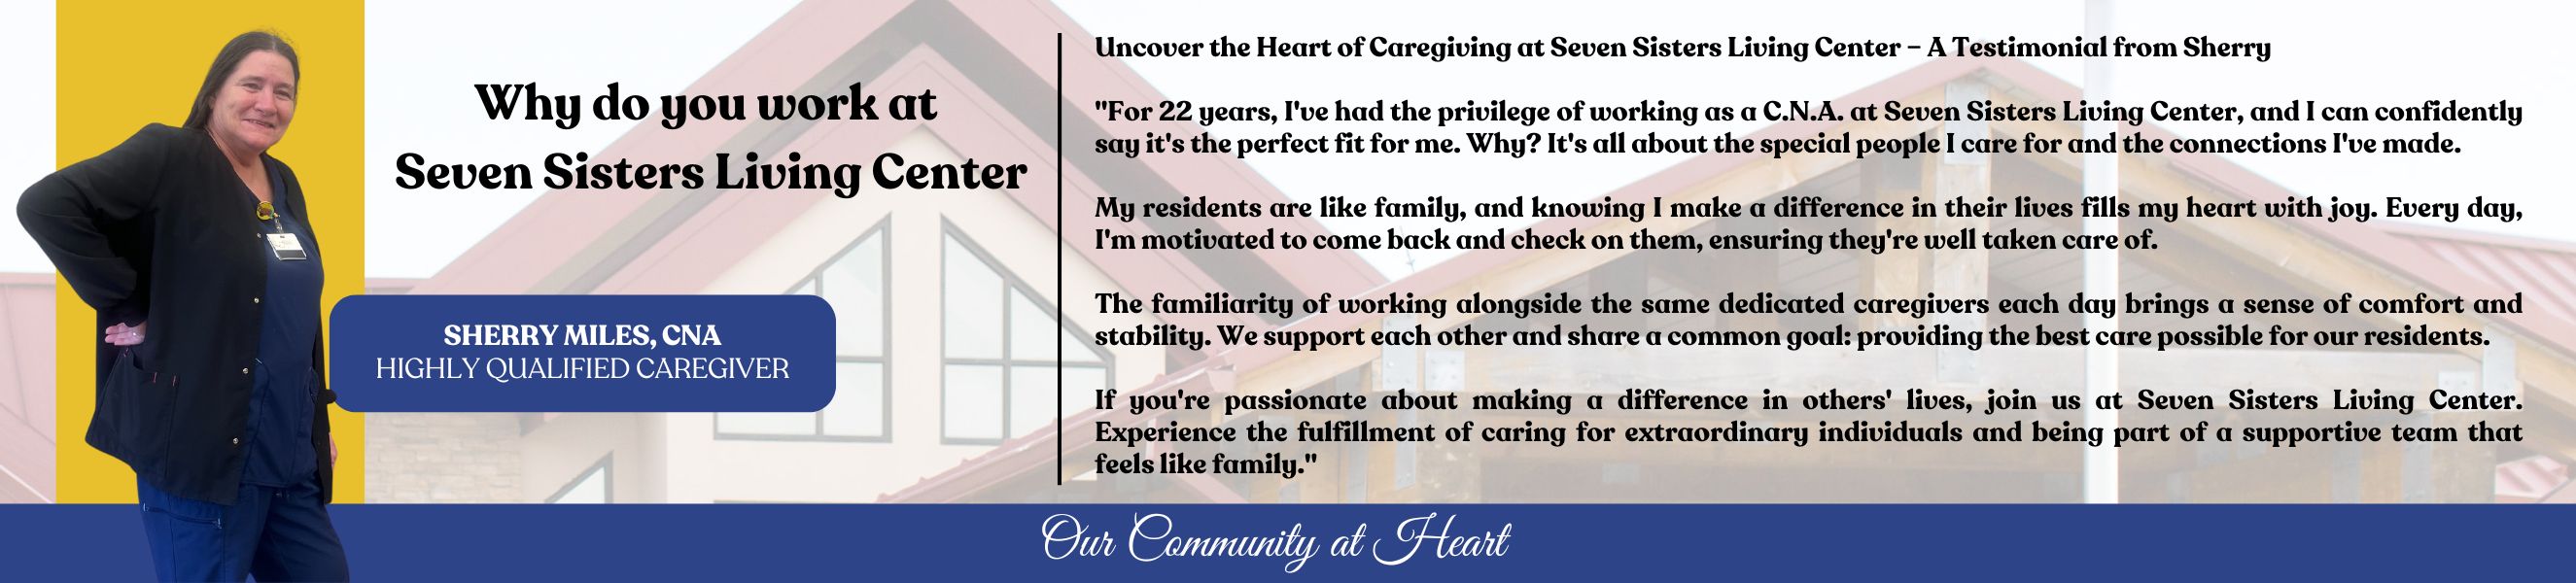 Seven Sisters Living Center Testimony by Sherry Miles, CNA.